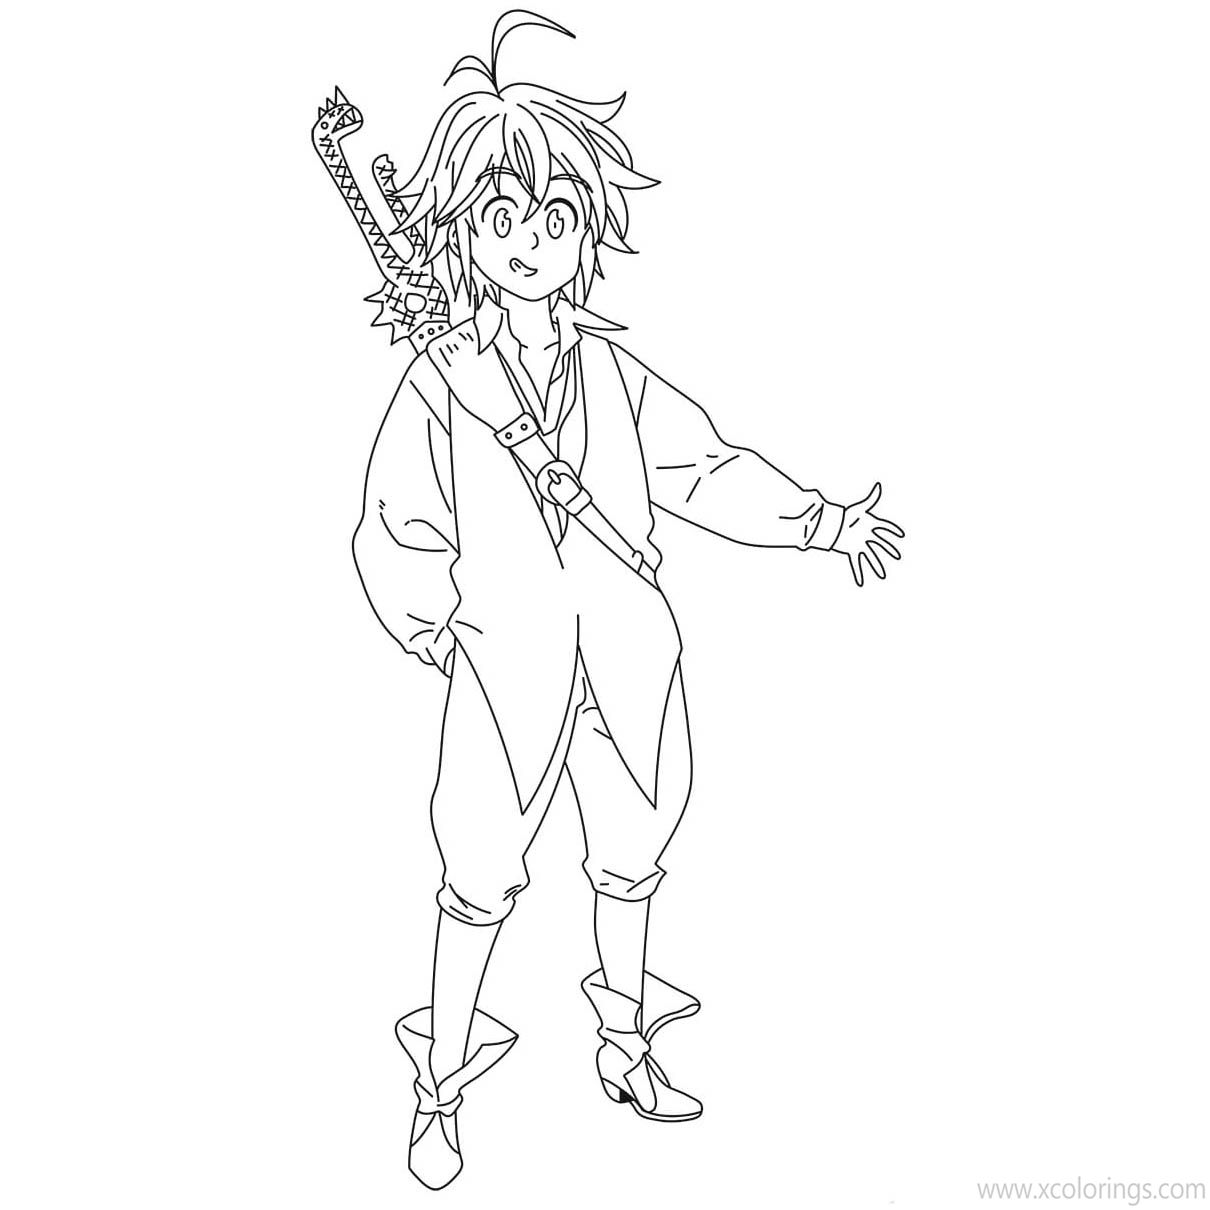 King from The Seven Deadly Sins Coloring Pages - XColorings.com